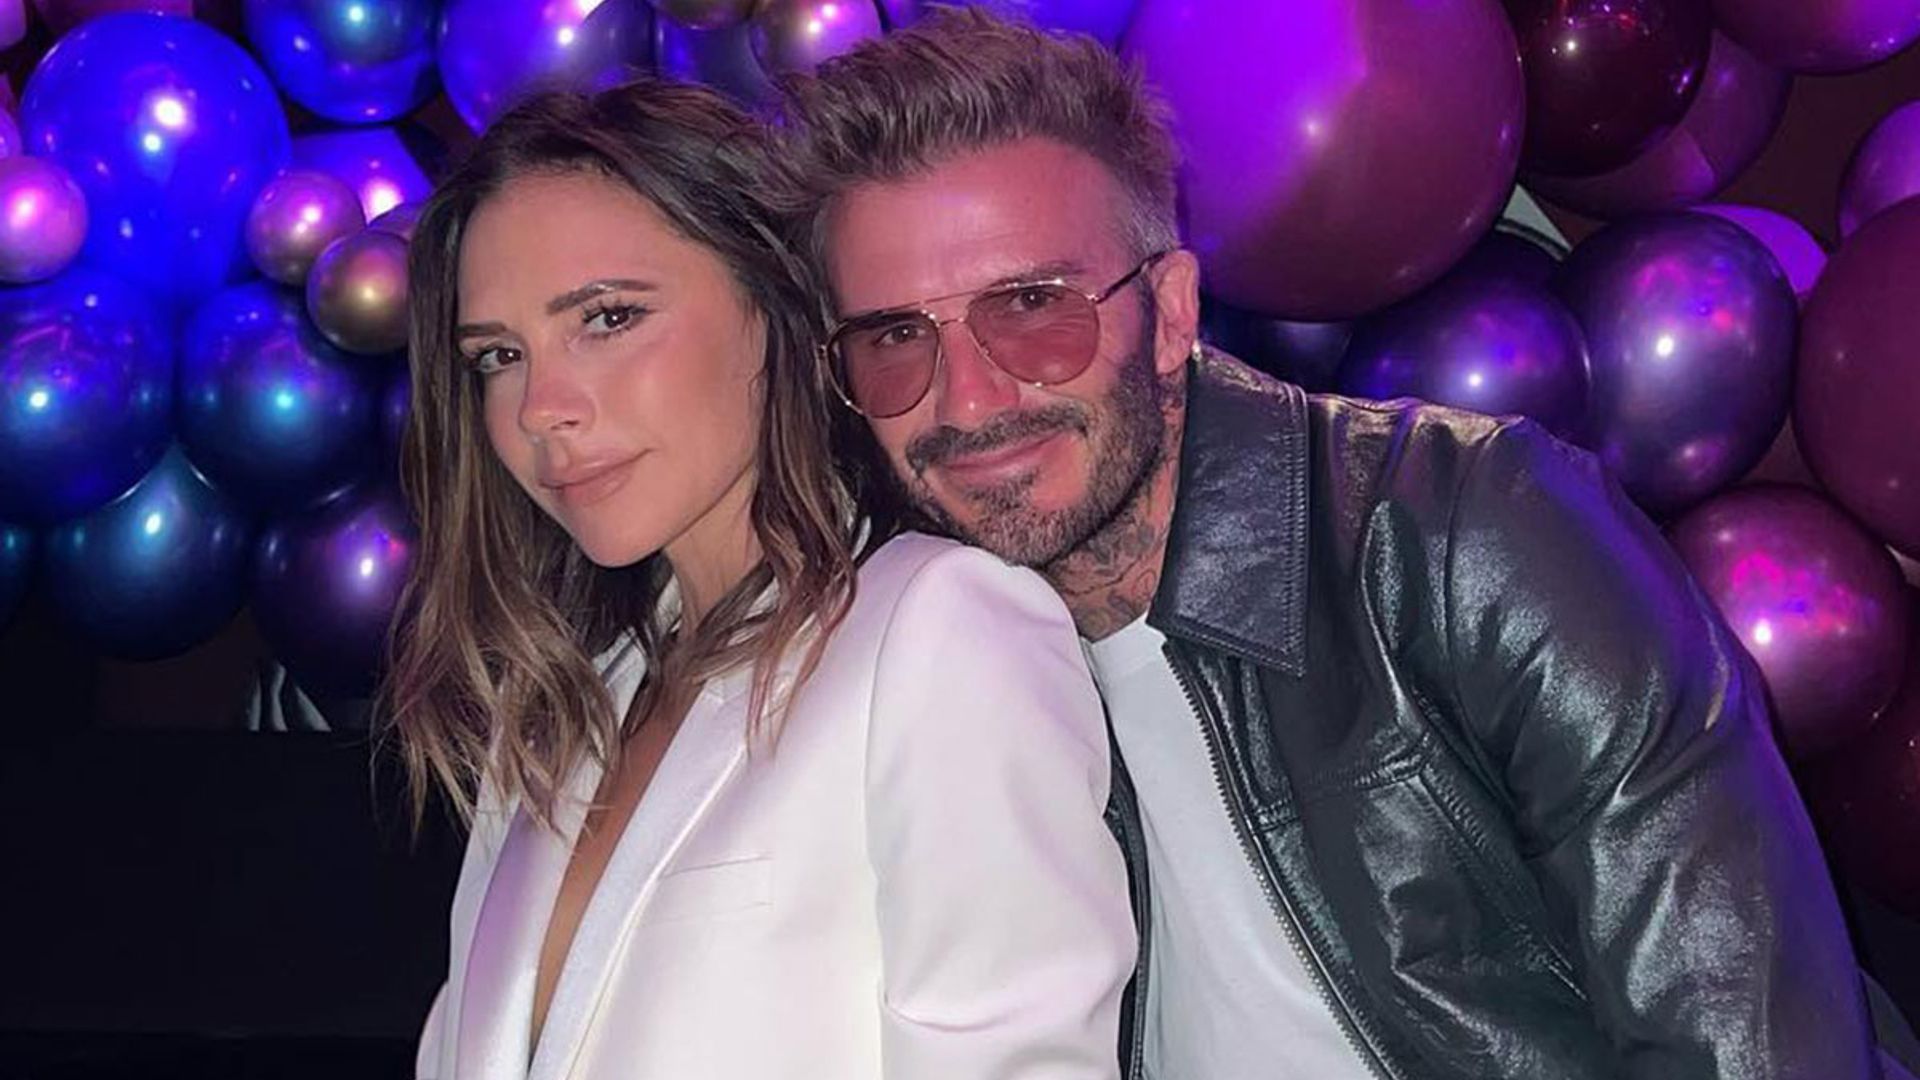 David Beckham Reveals Moment He Knew That He Wanted to Marry Victoria  Beckham (It Involves the Spice Girls), David Beckham, Spice Girls,  Victoria Beckham